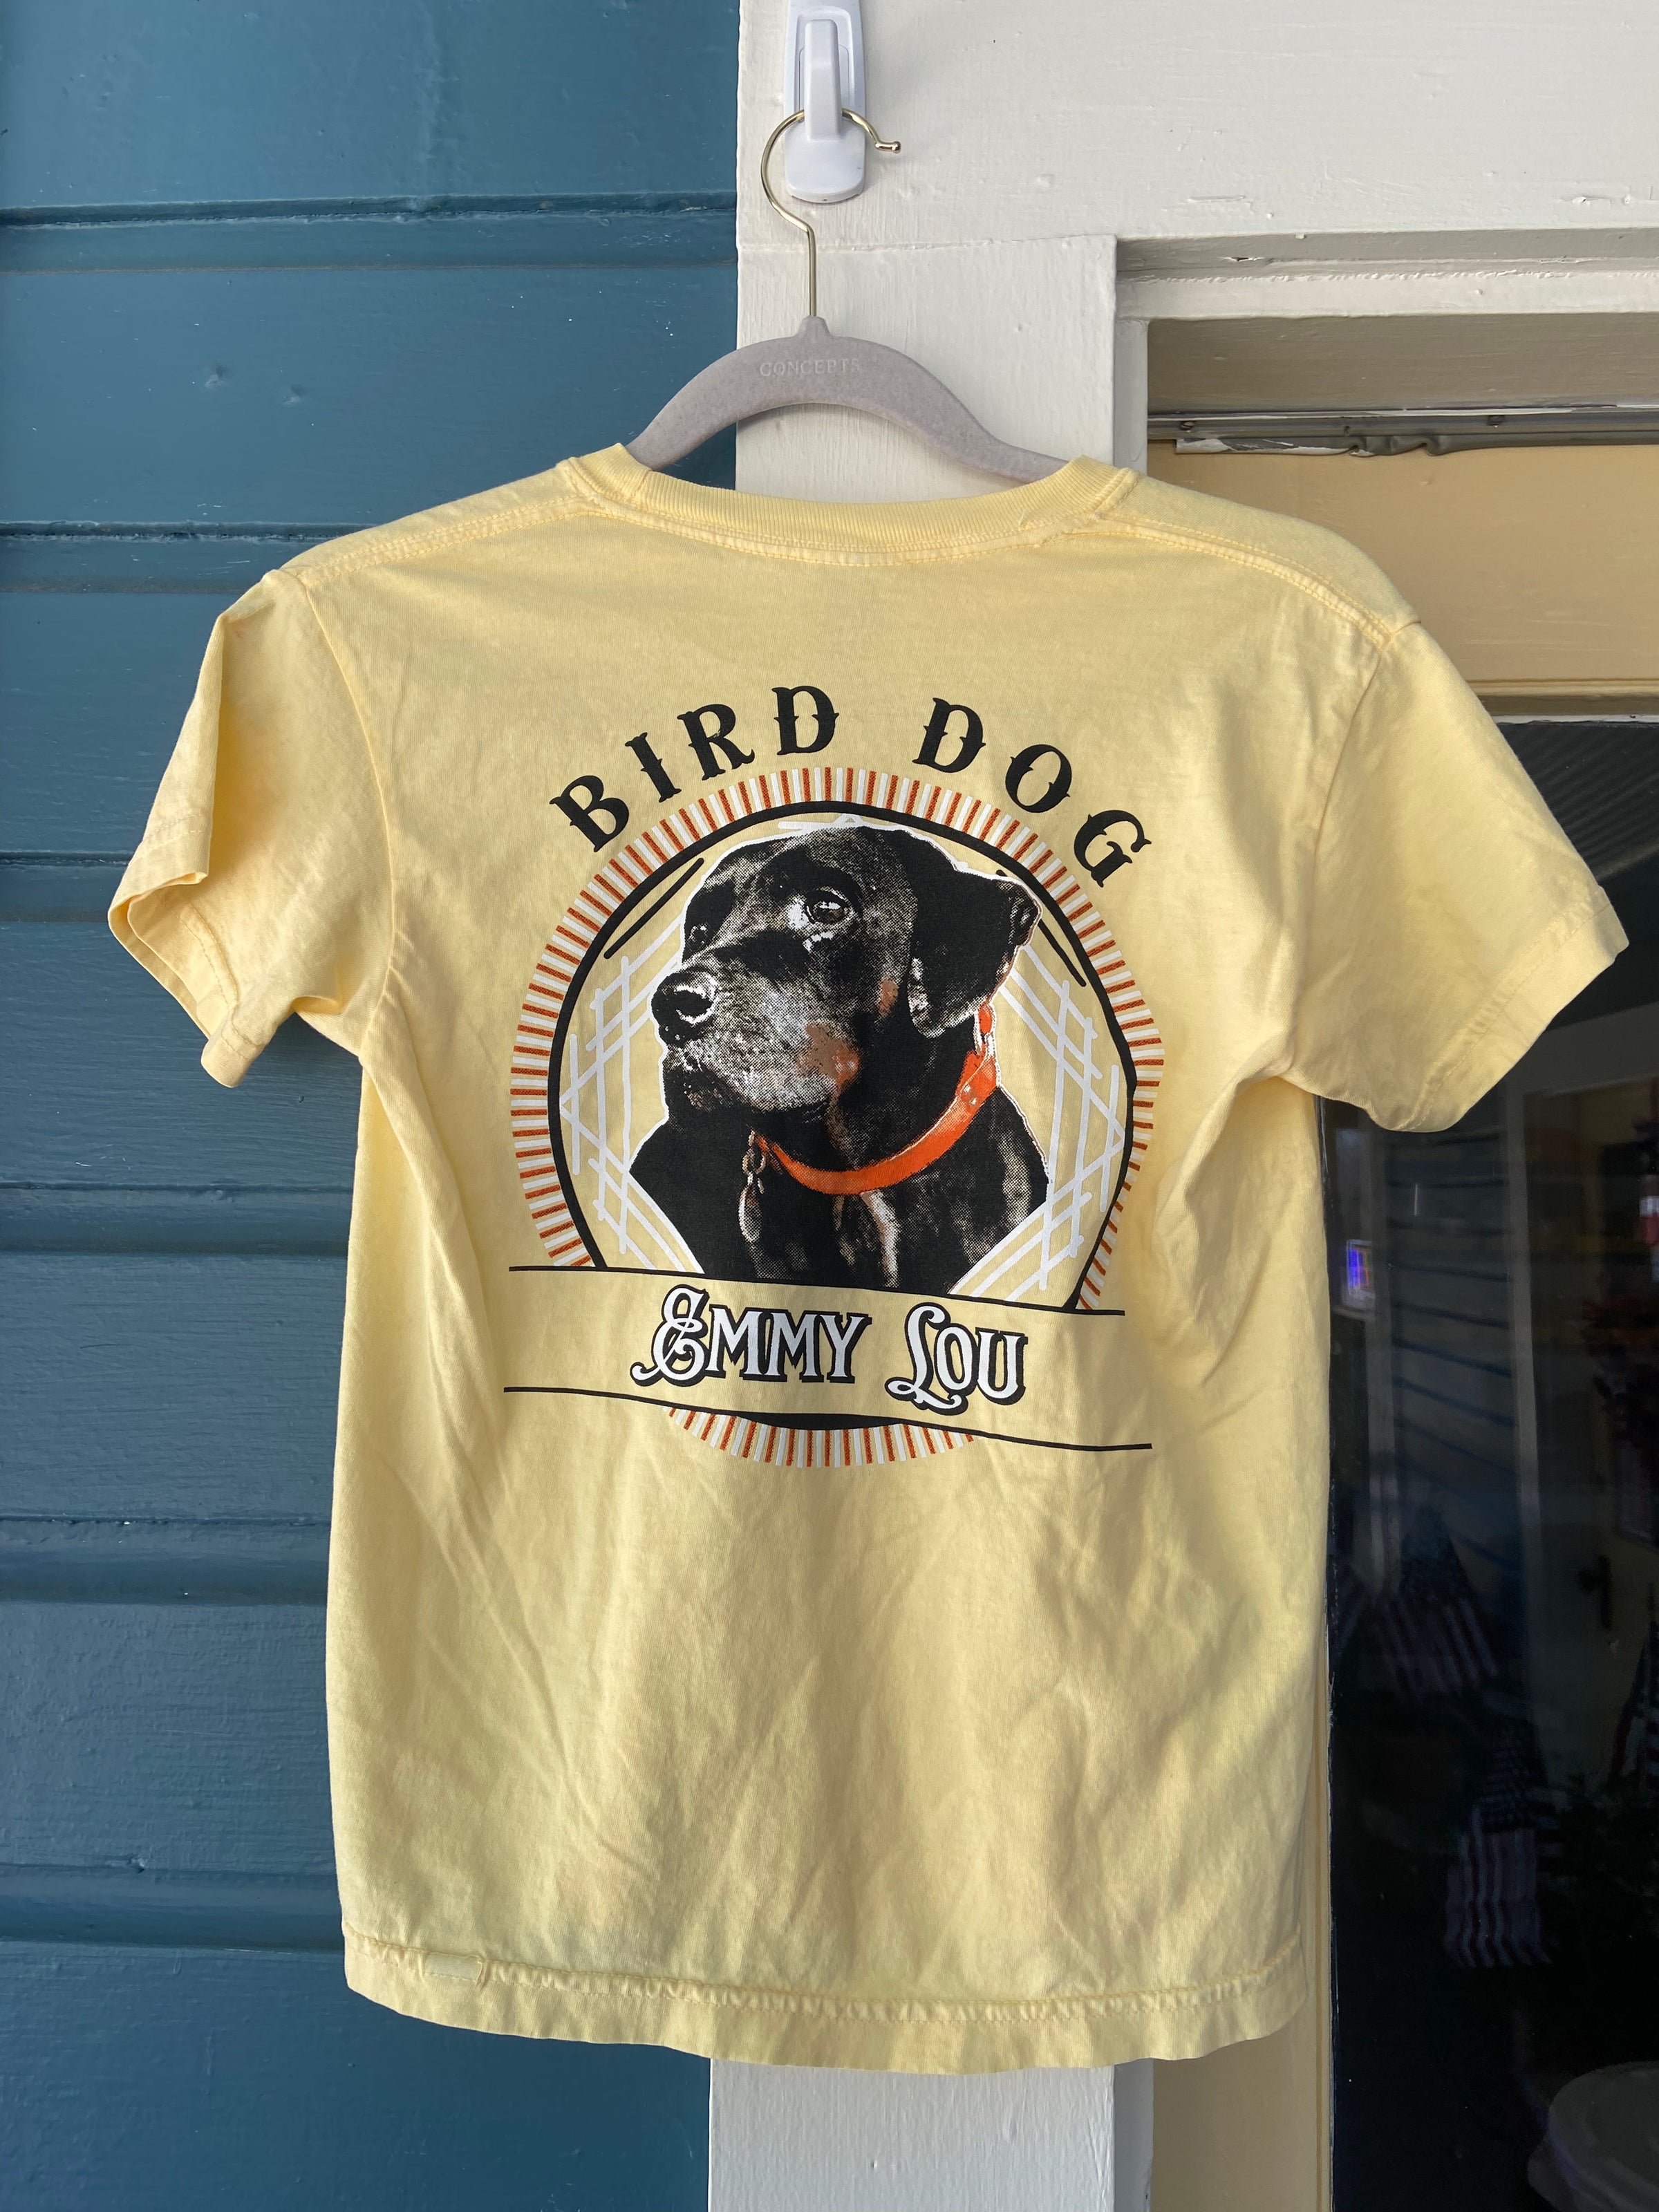 what does bird dog it mean